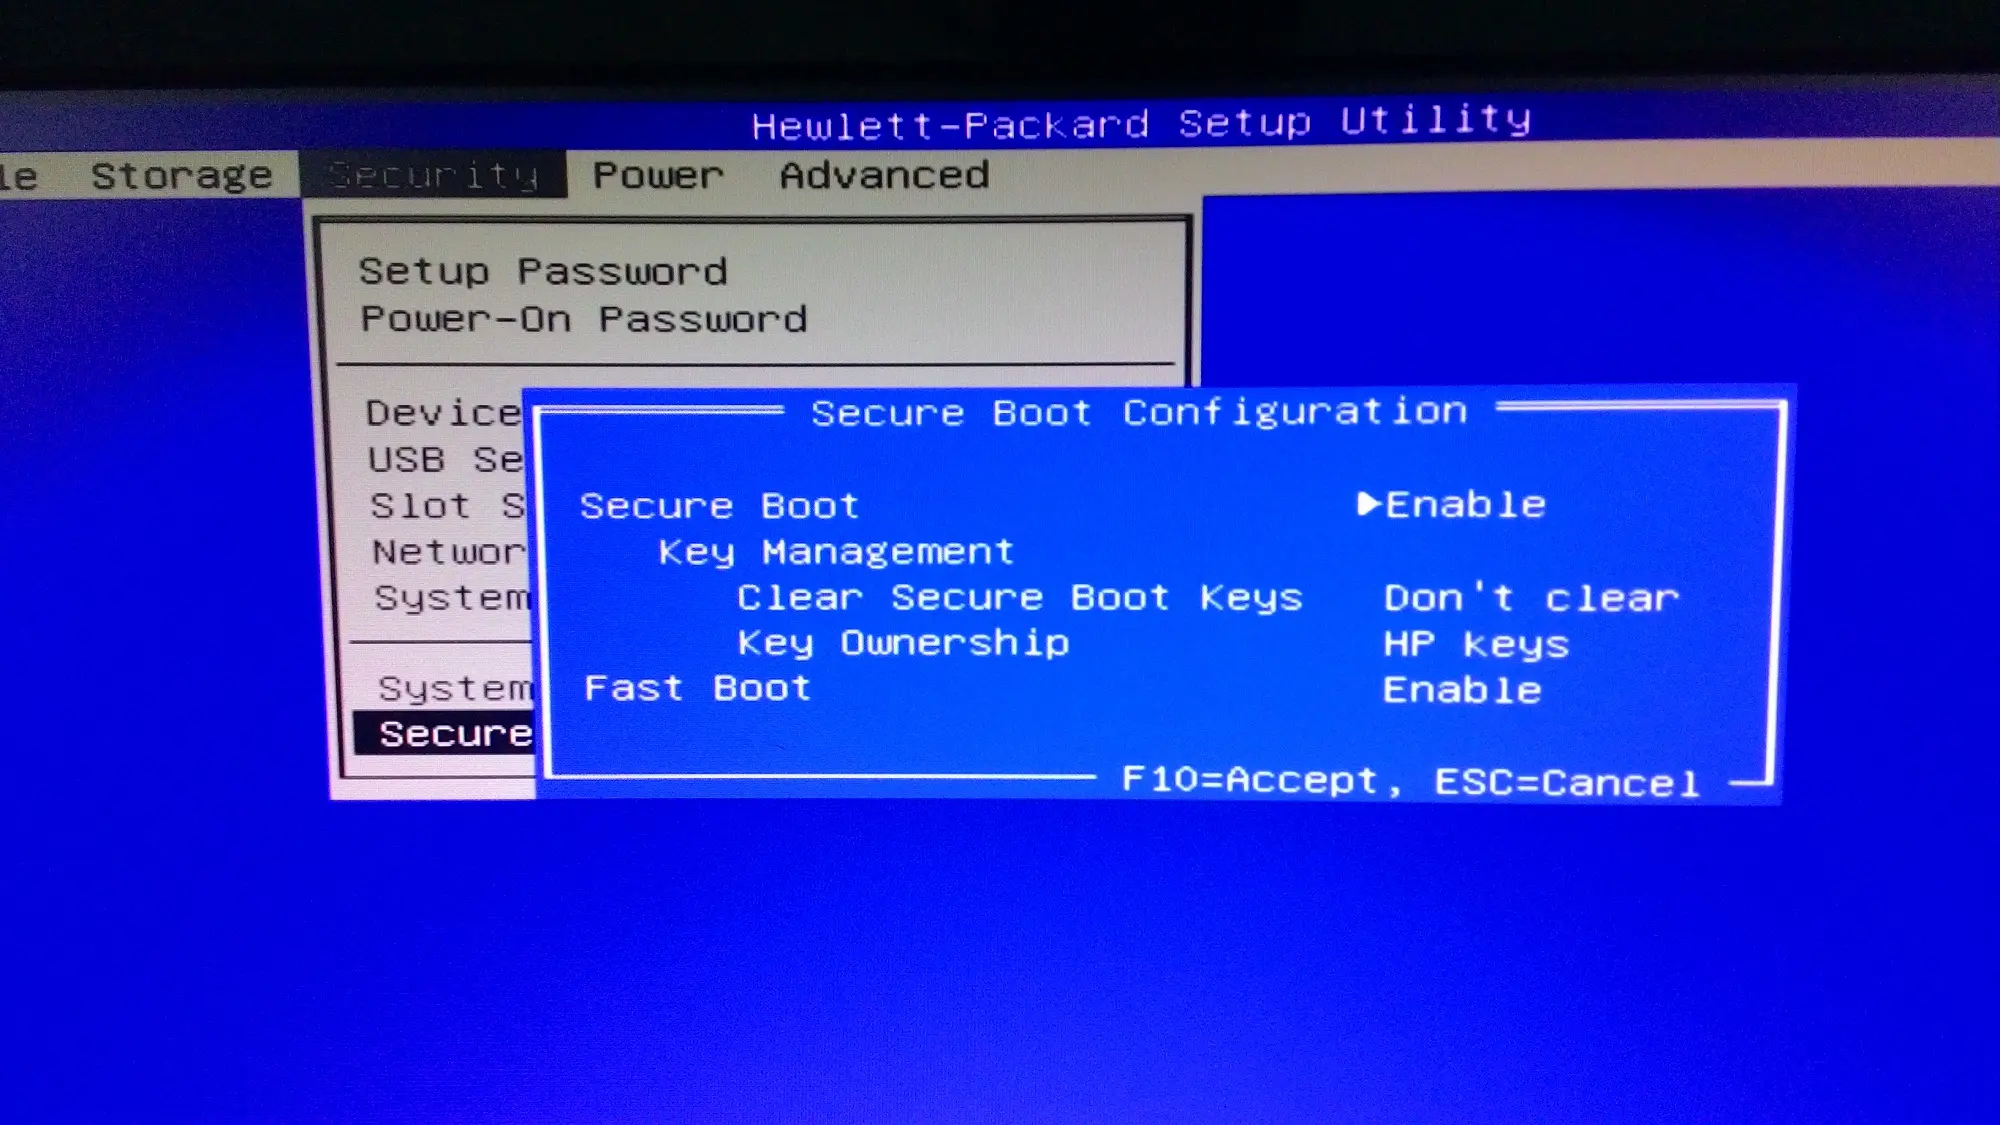 hewlett packard setup utility boot order - What is the correct BIOS boot order